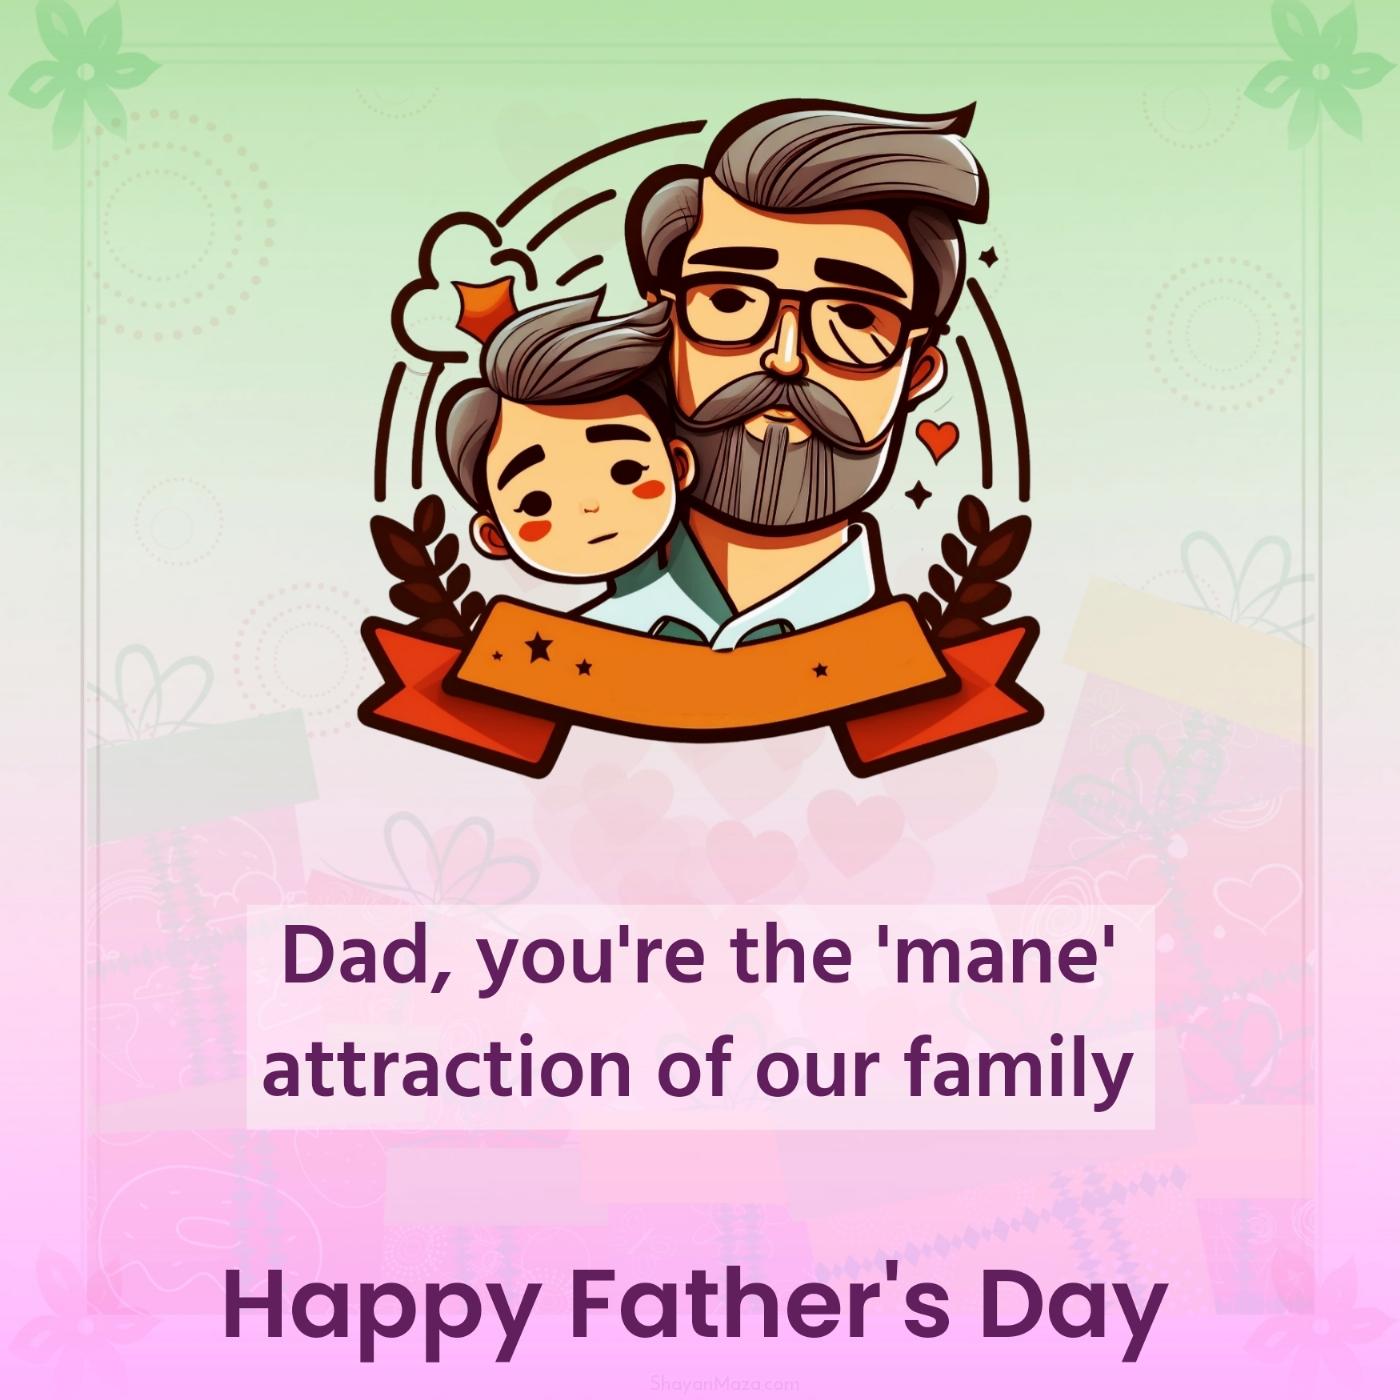 Dad you're the 'mane' attraction of our family!